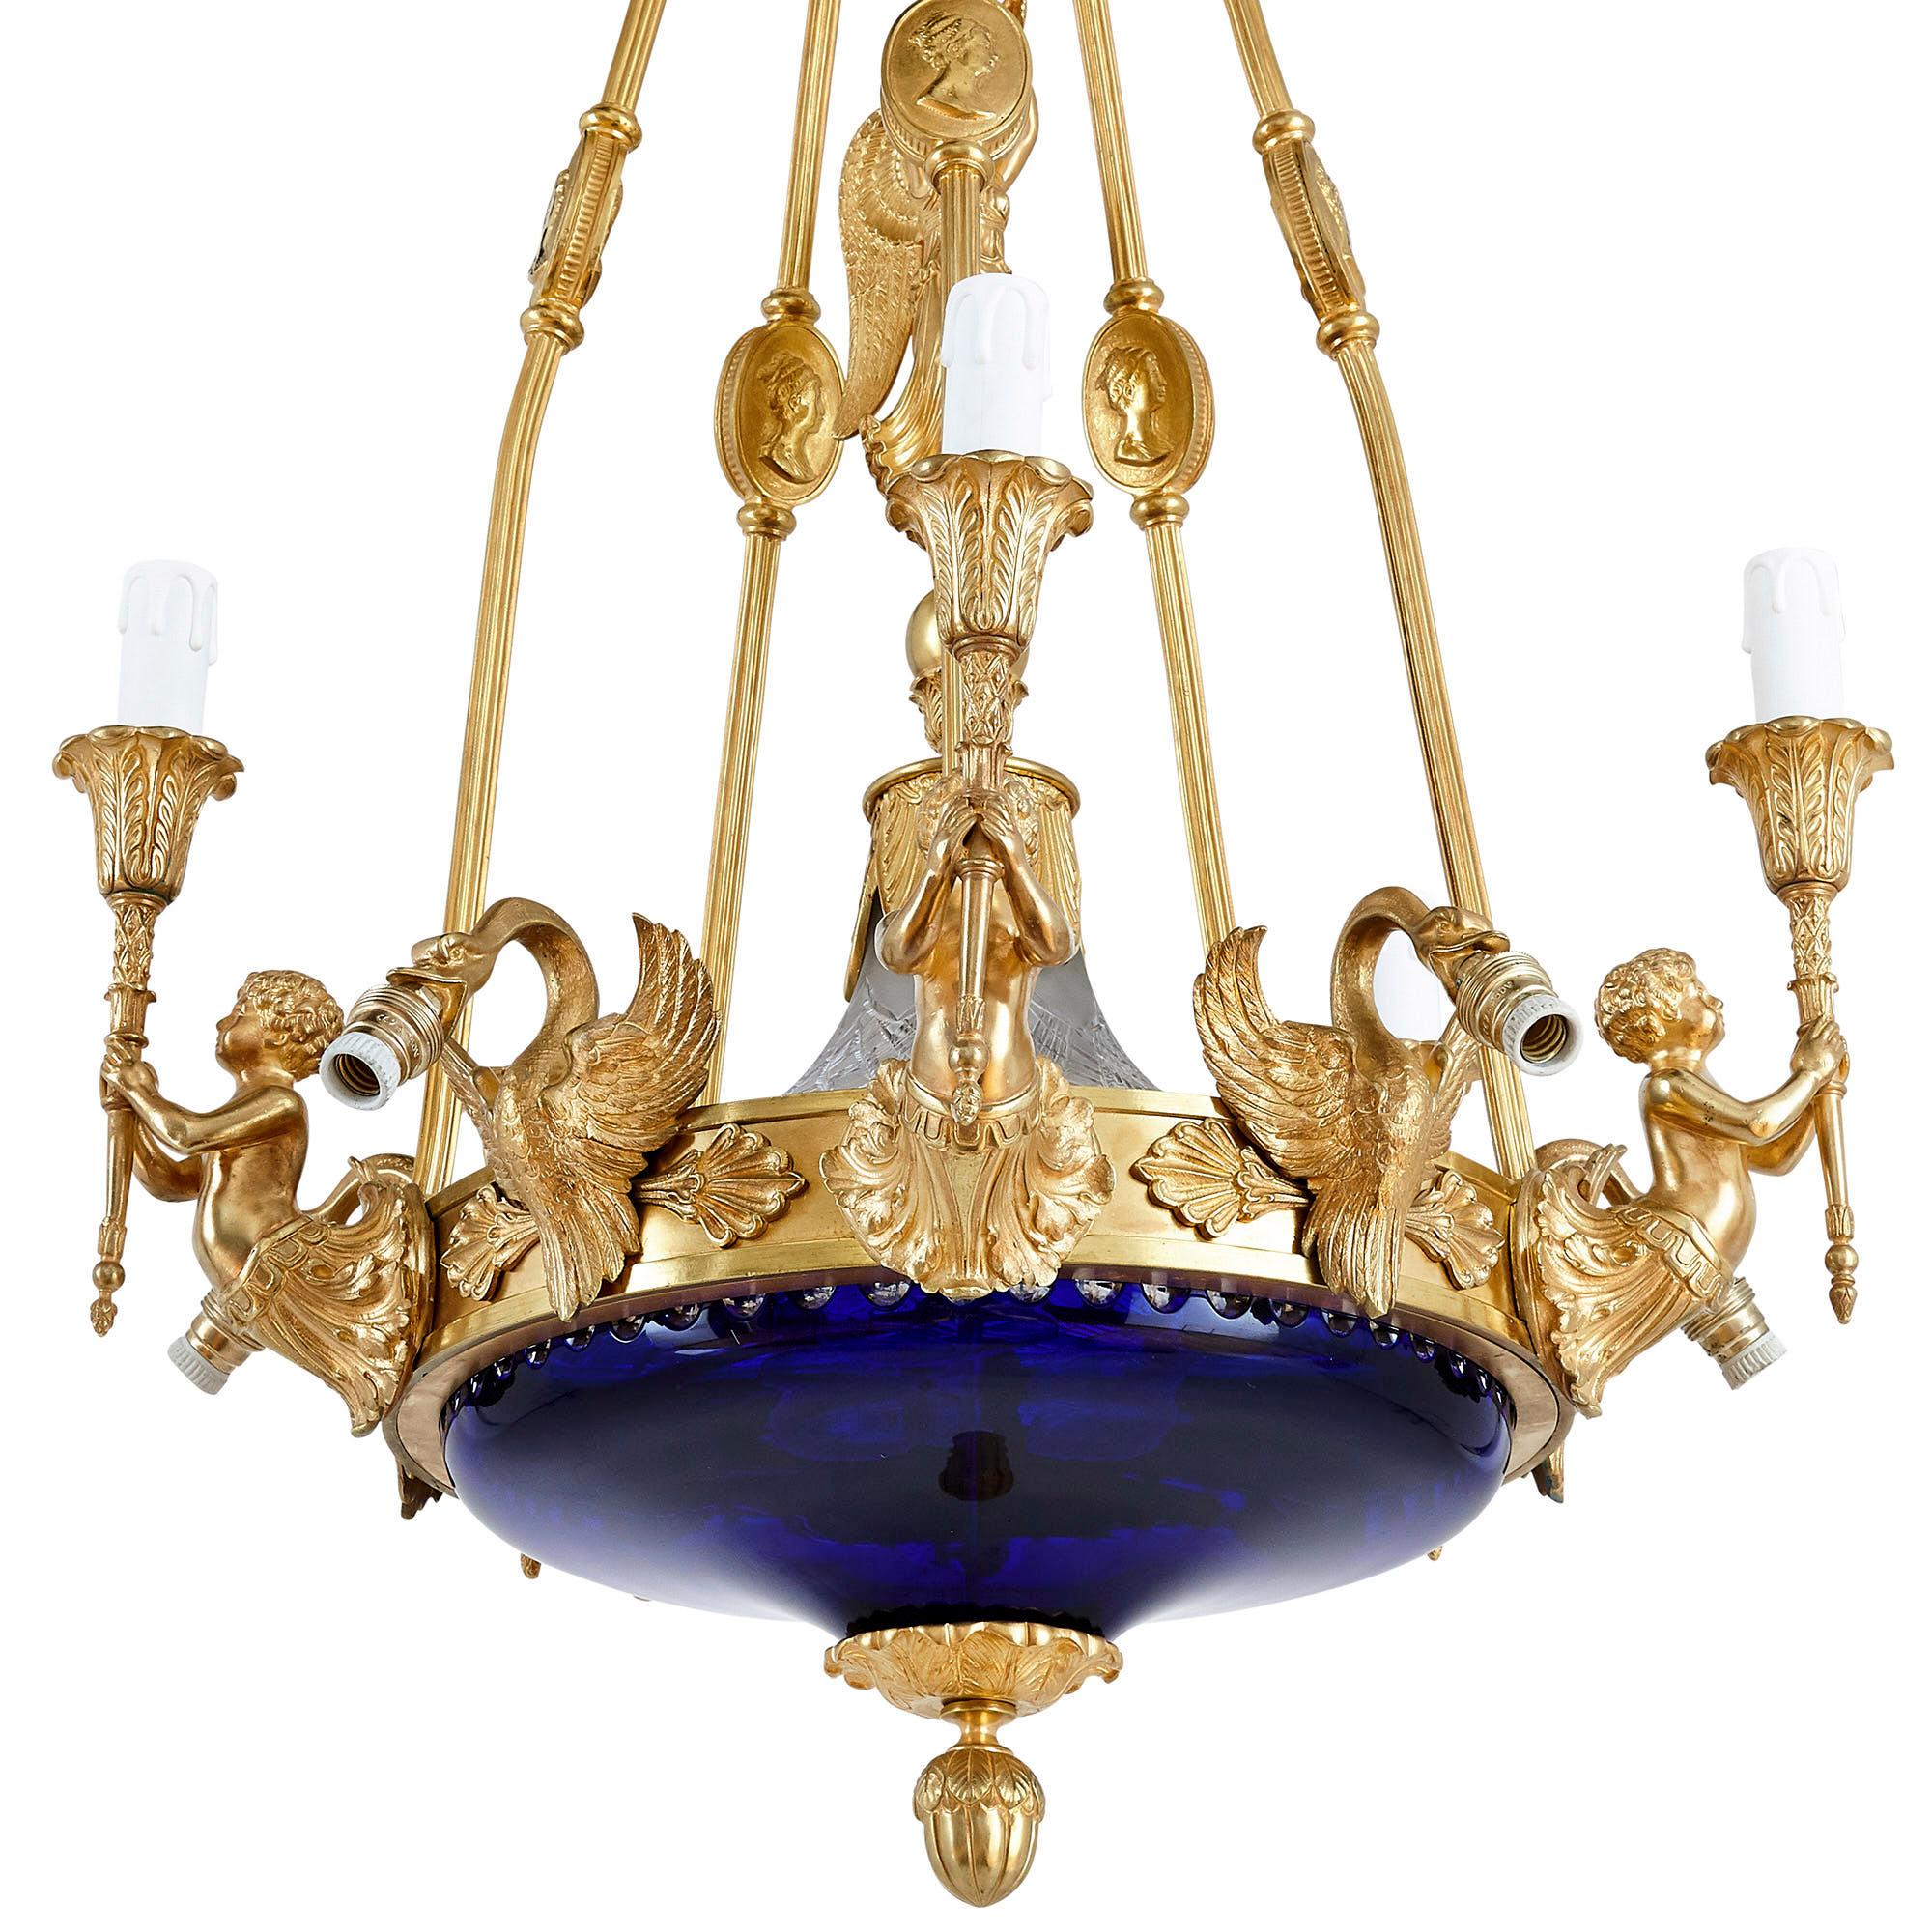 Neoclassical style gilt bronze and cobalt blue glass chandelier
French, early 20th century
Measures: Height 97cm, diameter 56cm

This beautiful neoclassical style chandelier is reminiscent of both the Louis XVI and Empire decorative styles: the